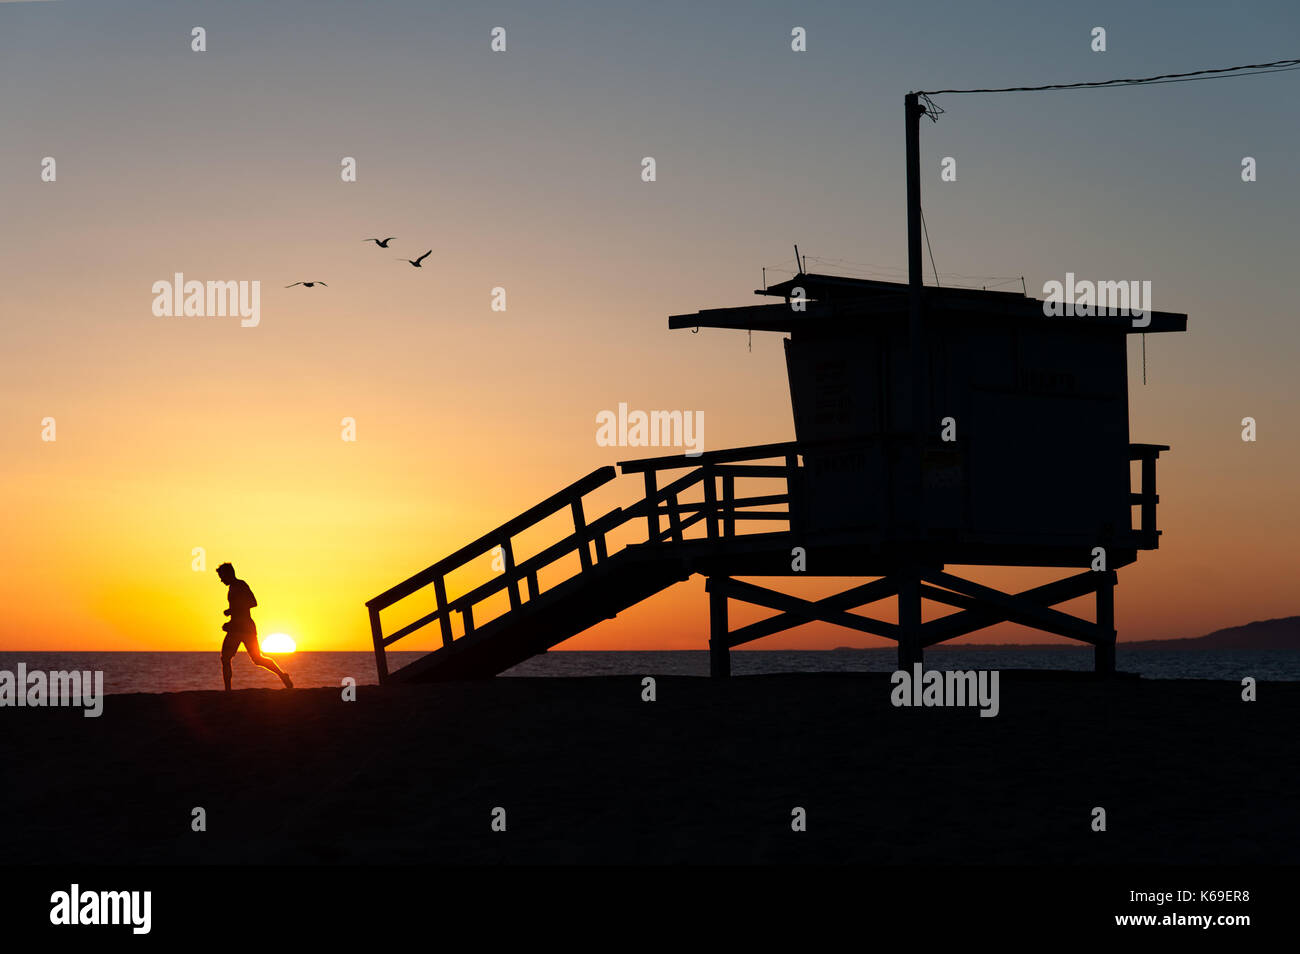 Silhouettes of a sportive runner working out on the sand and the iconic lifeguard tower with flying birds at sunset in Venice Beach, CA. Stock Photo